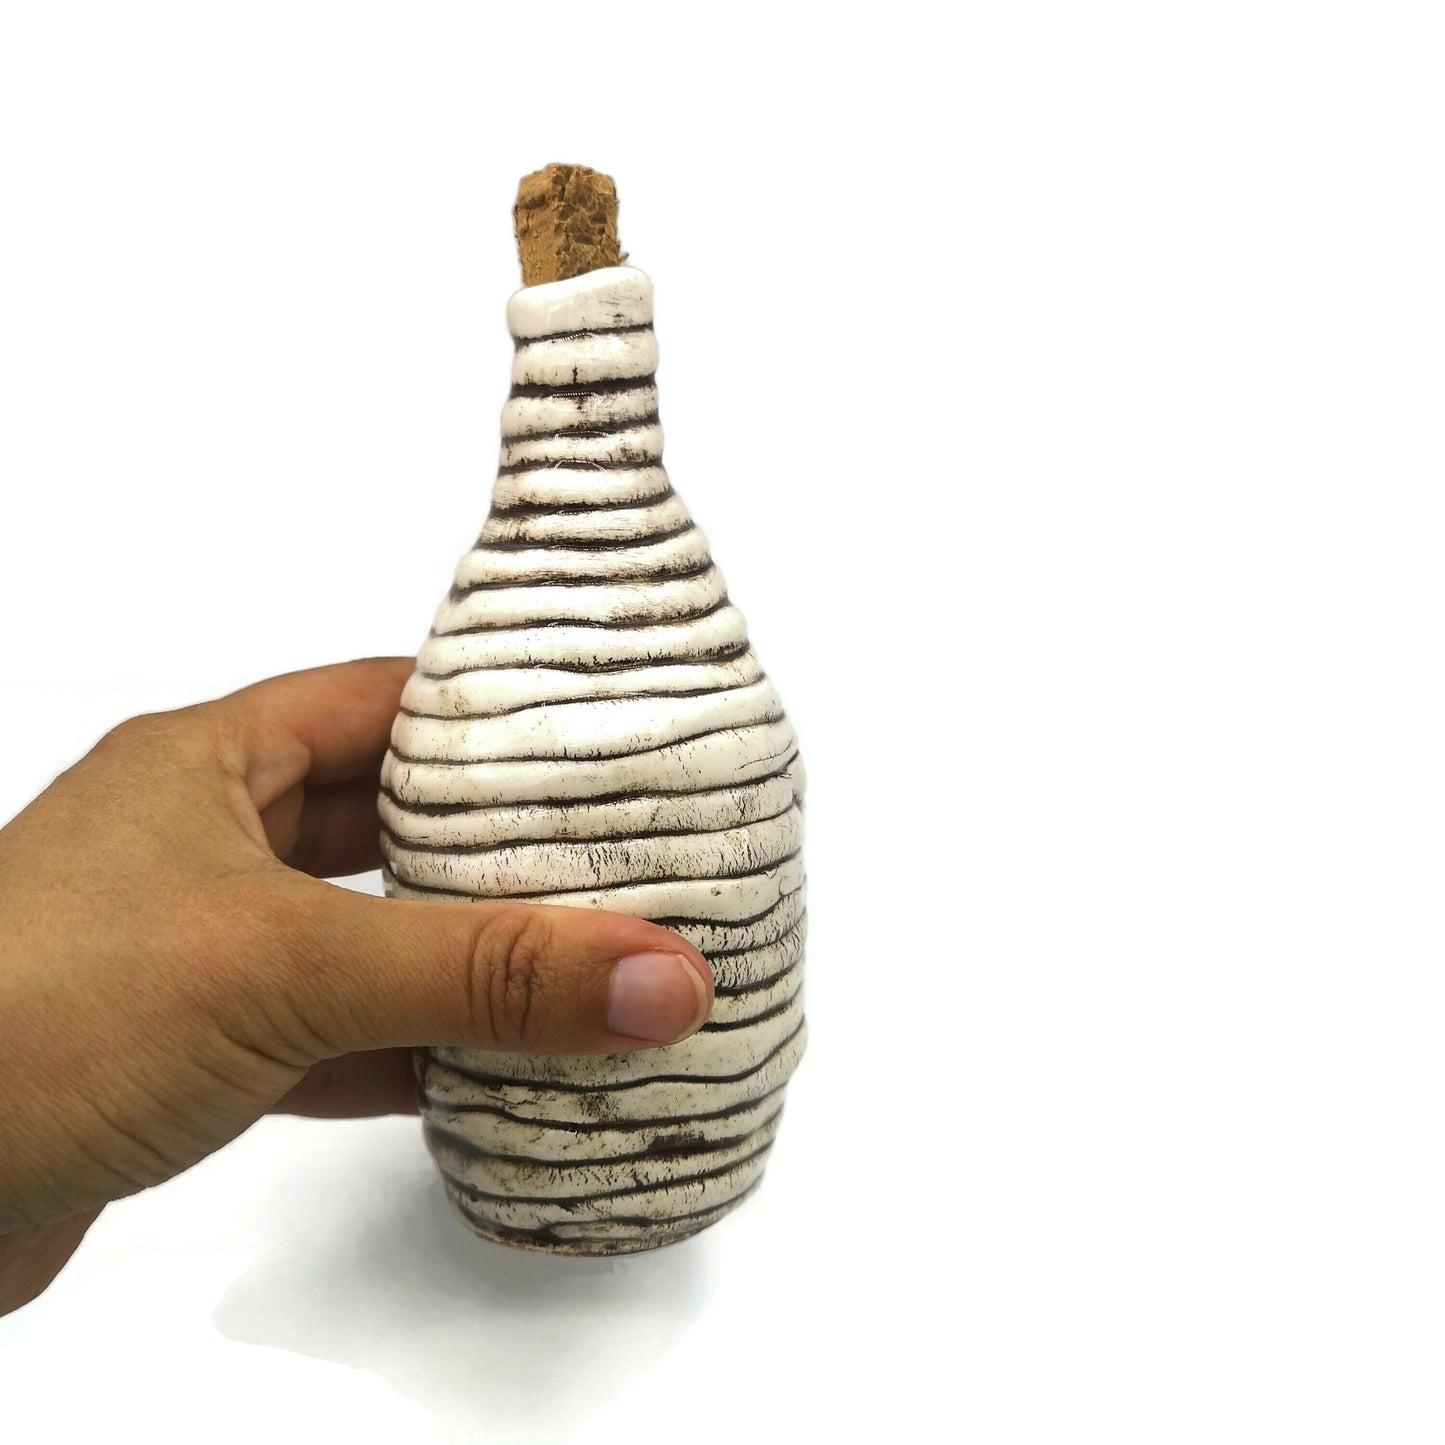 DECORATIVE BOTTLES, SMALL Ceramic Bottle With Cork, Host Gift, Housewarming Gift First Home - Ceramica Ana Rafael